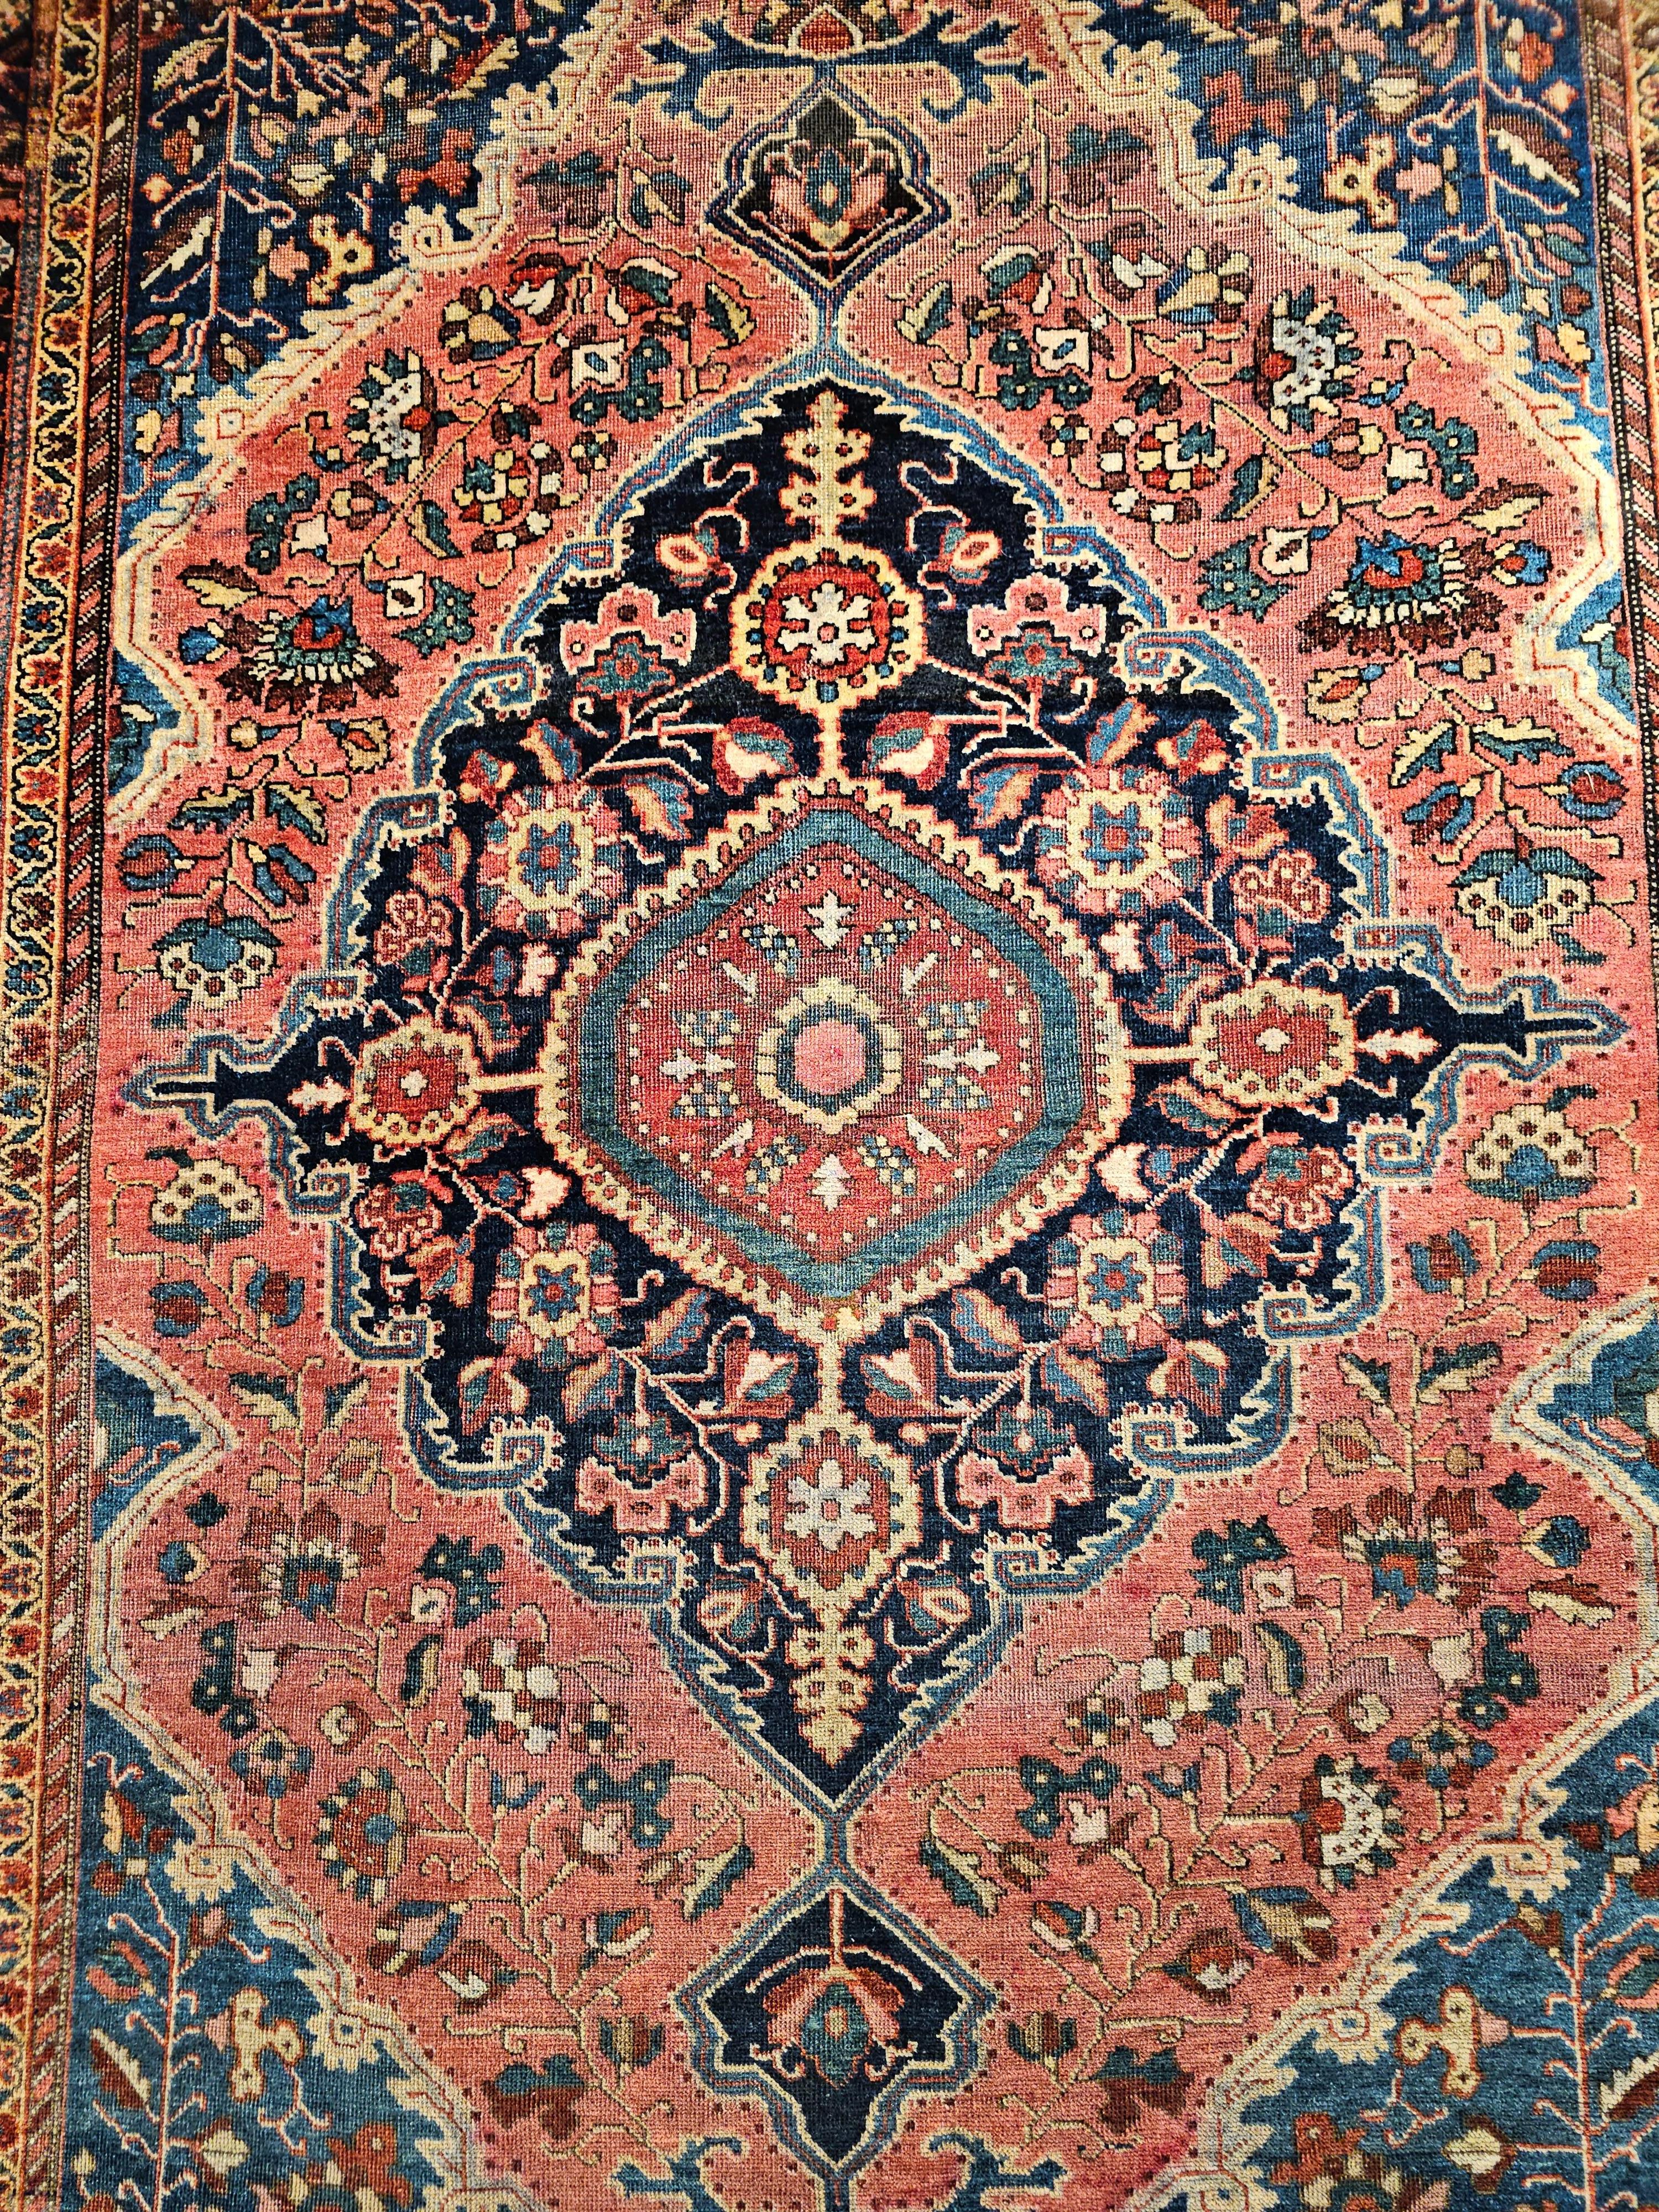 Late 19th Century 19th Century Persian Farahan Sarouk Area Rug in Rust Red, French Blue, Navy Blue For Sale